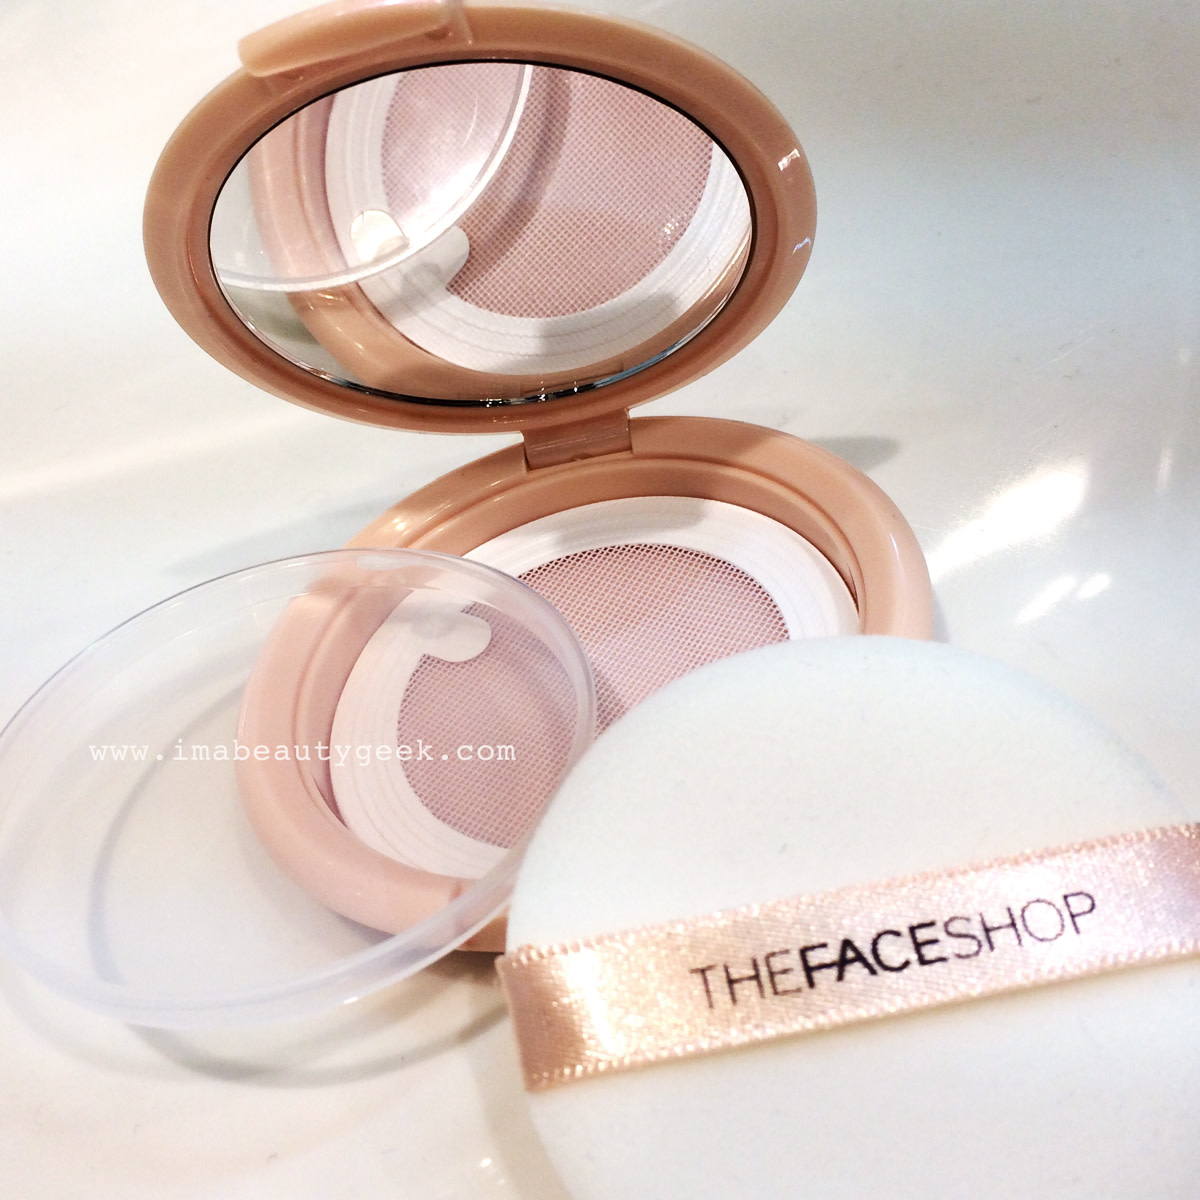 THEFACESHOP fillable loose-powder compact (great for saving your broken pressed powder too)